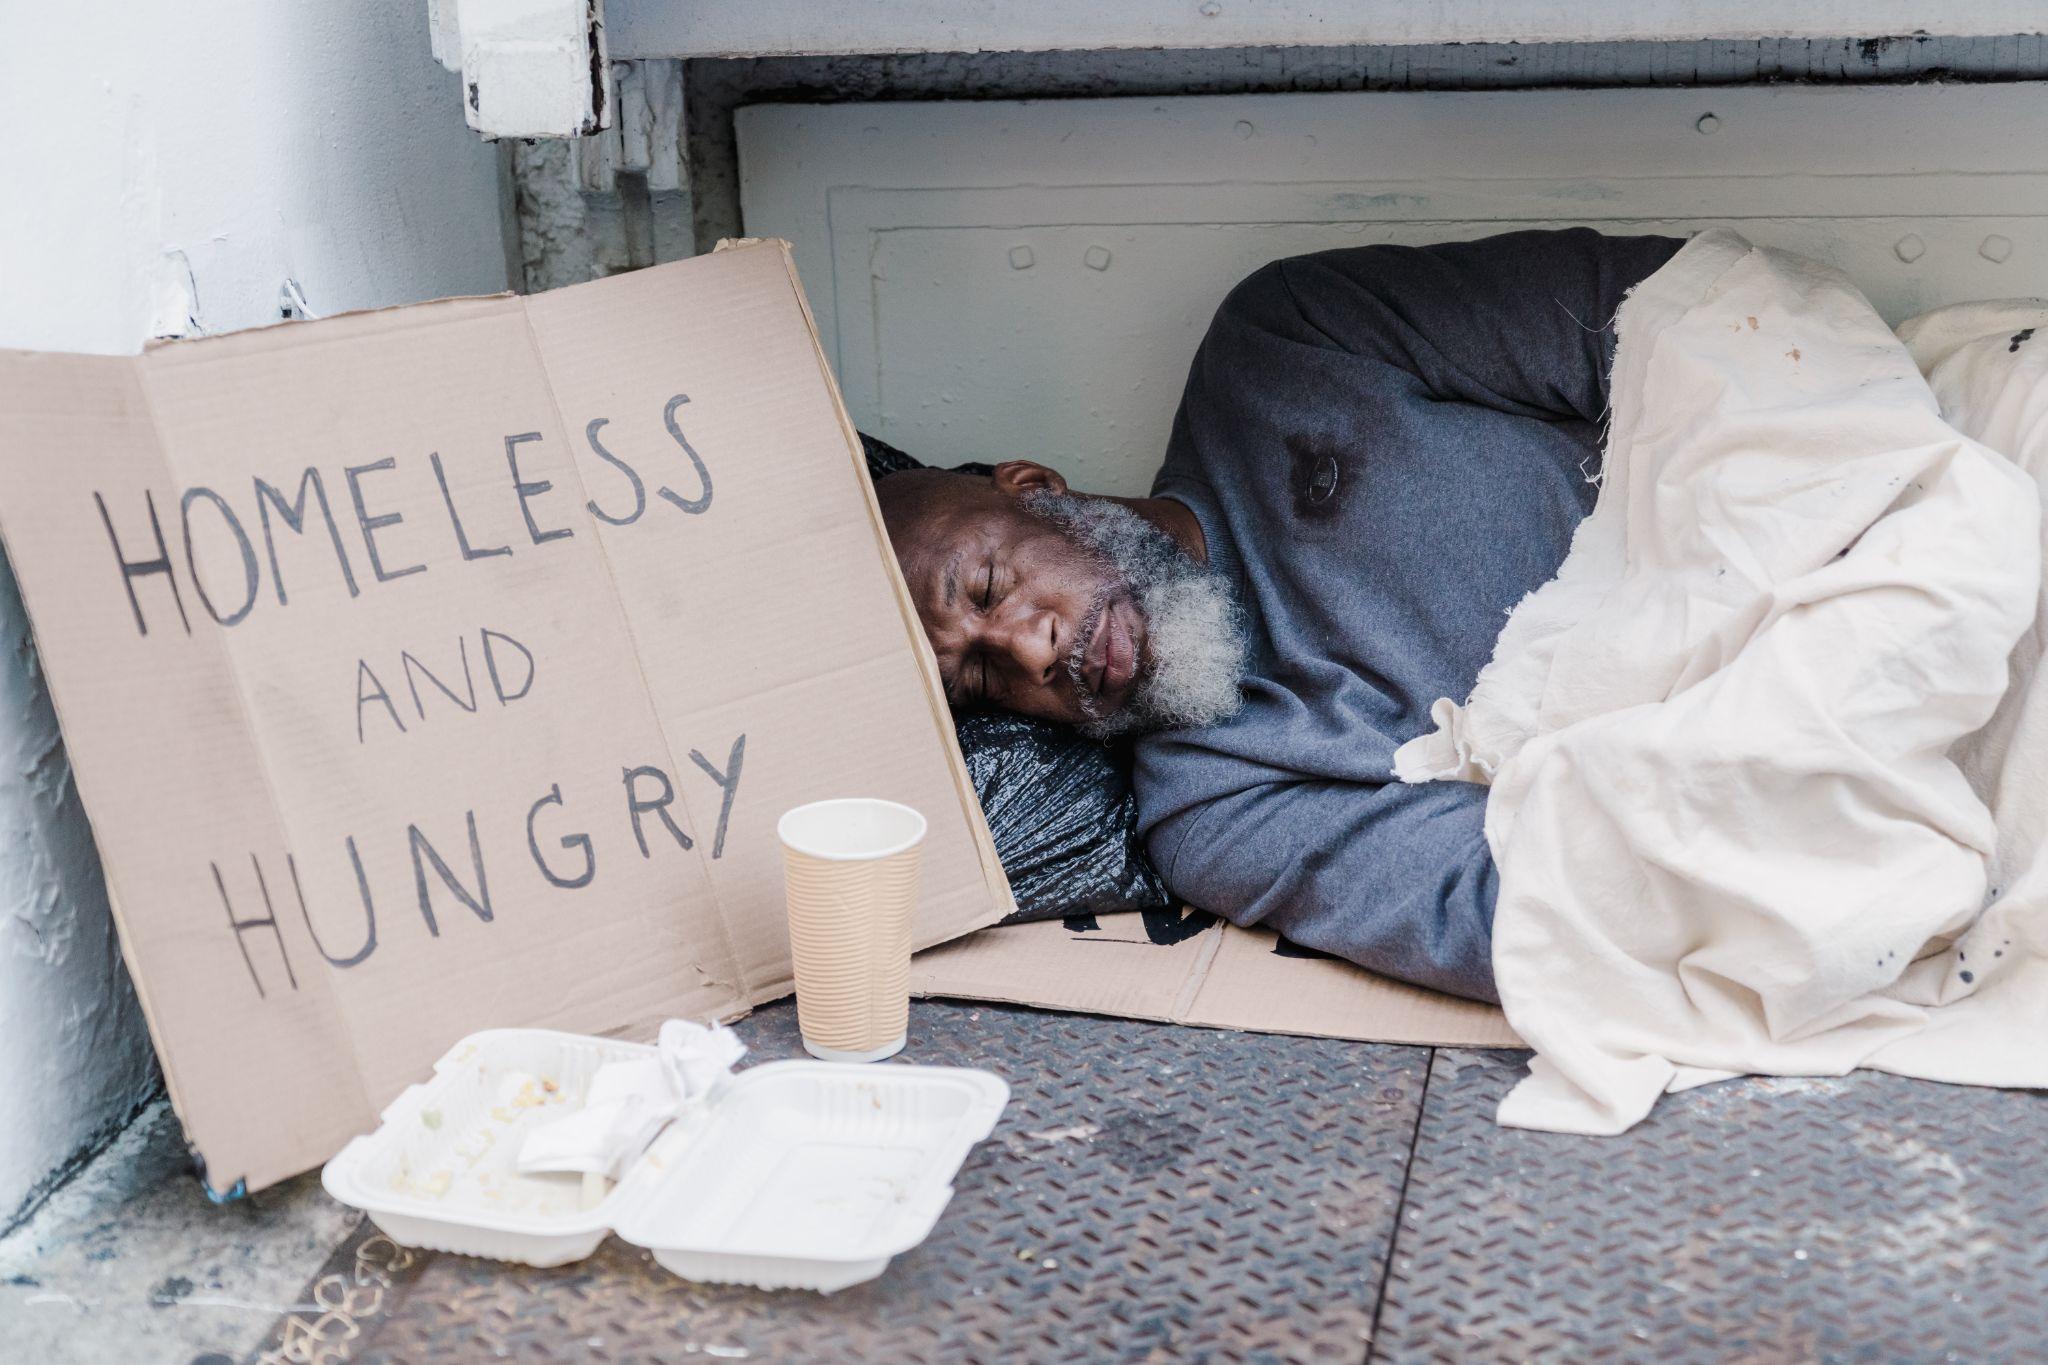 Man sleeping on the sidewalk next to a cardboard sign that reads “homeless and hungry.”